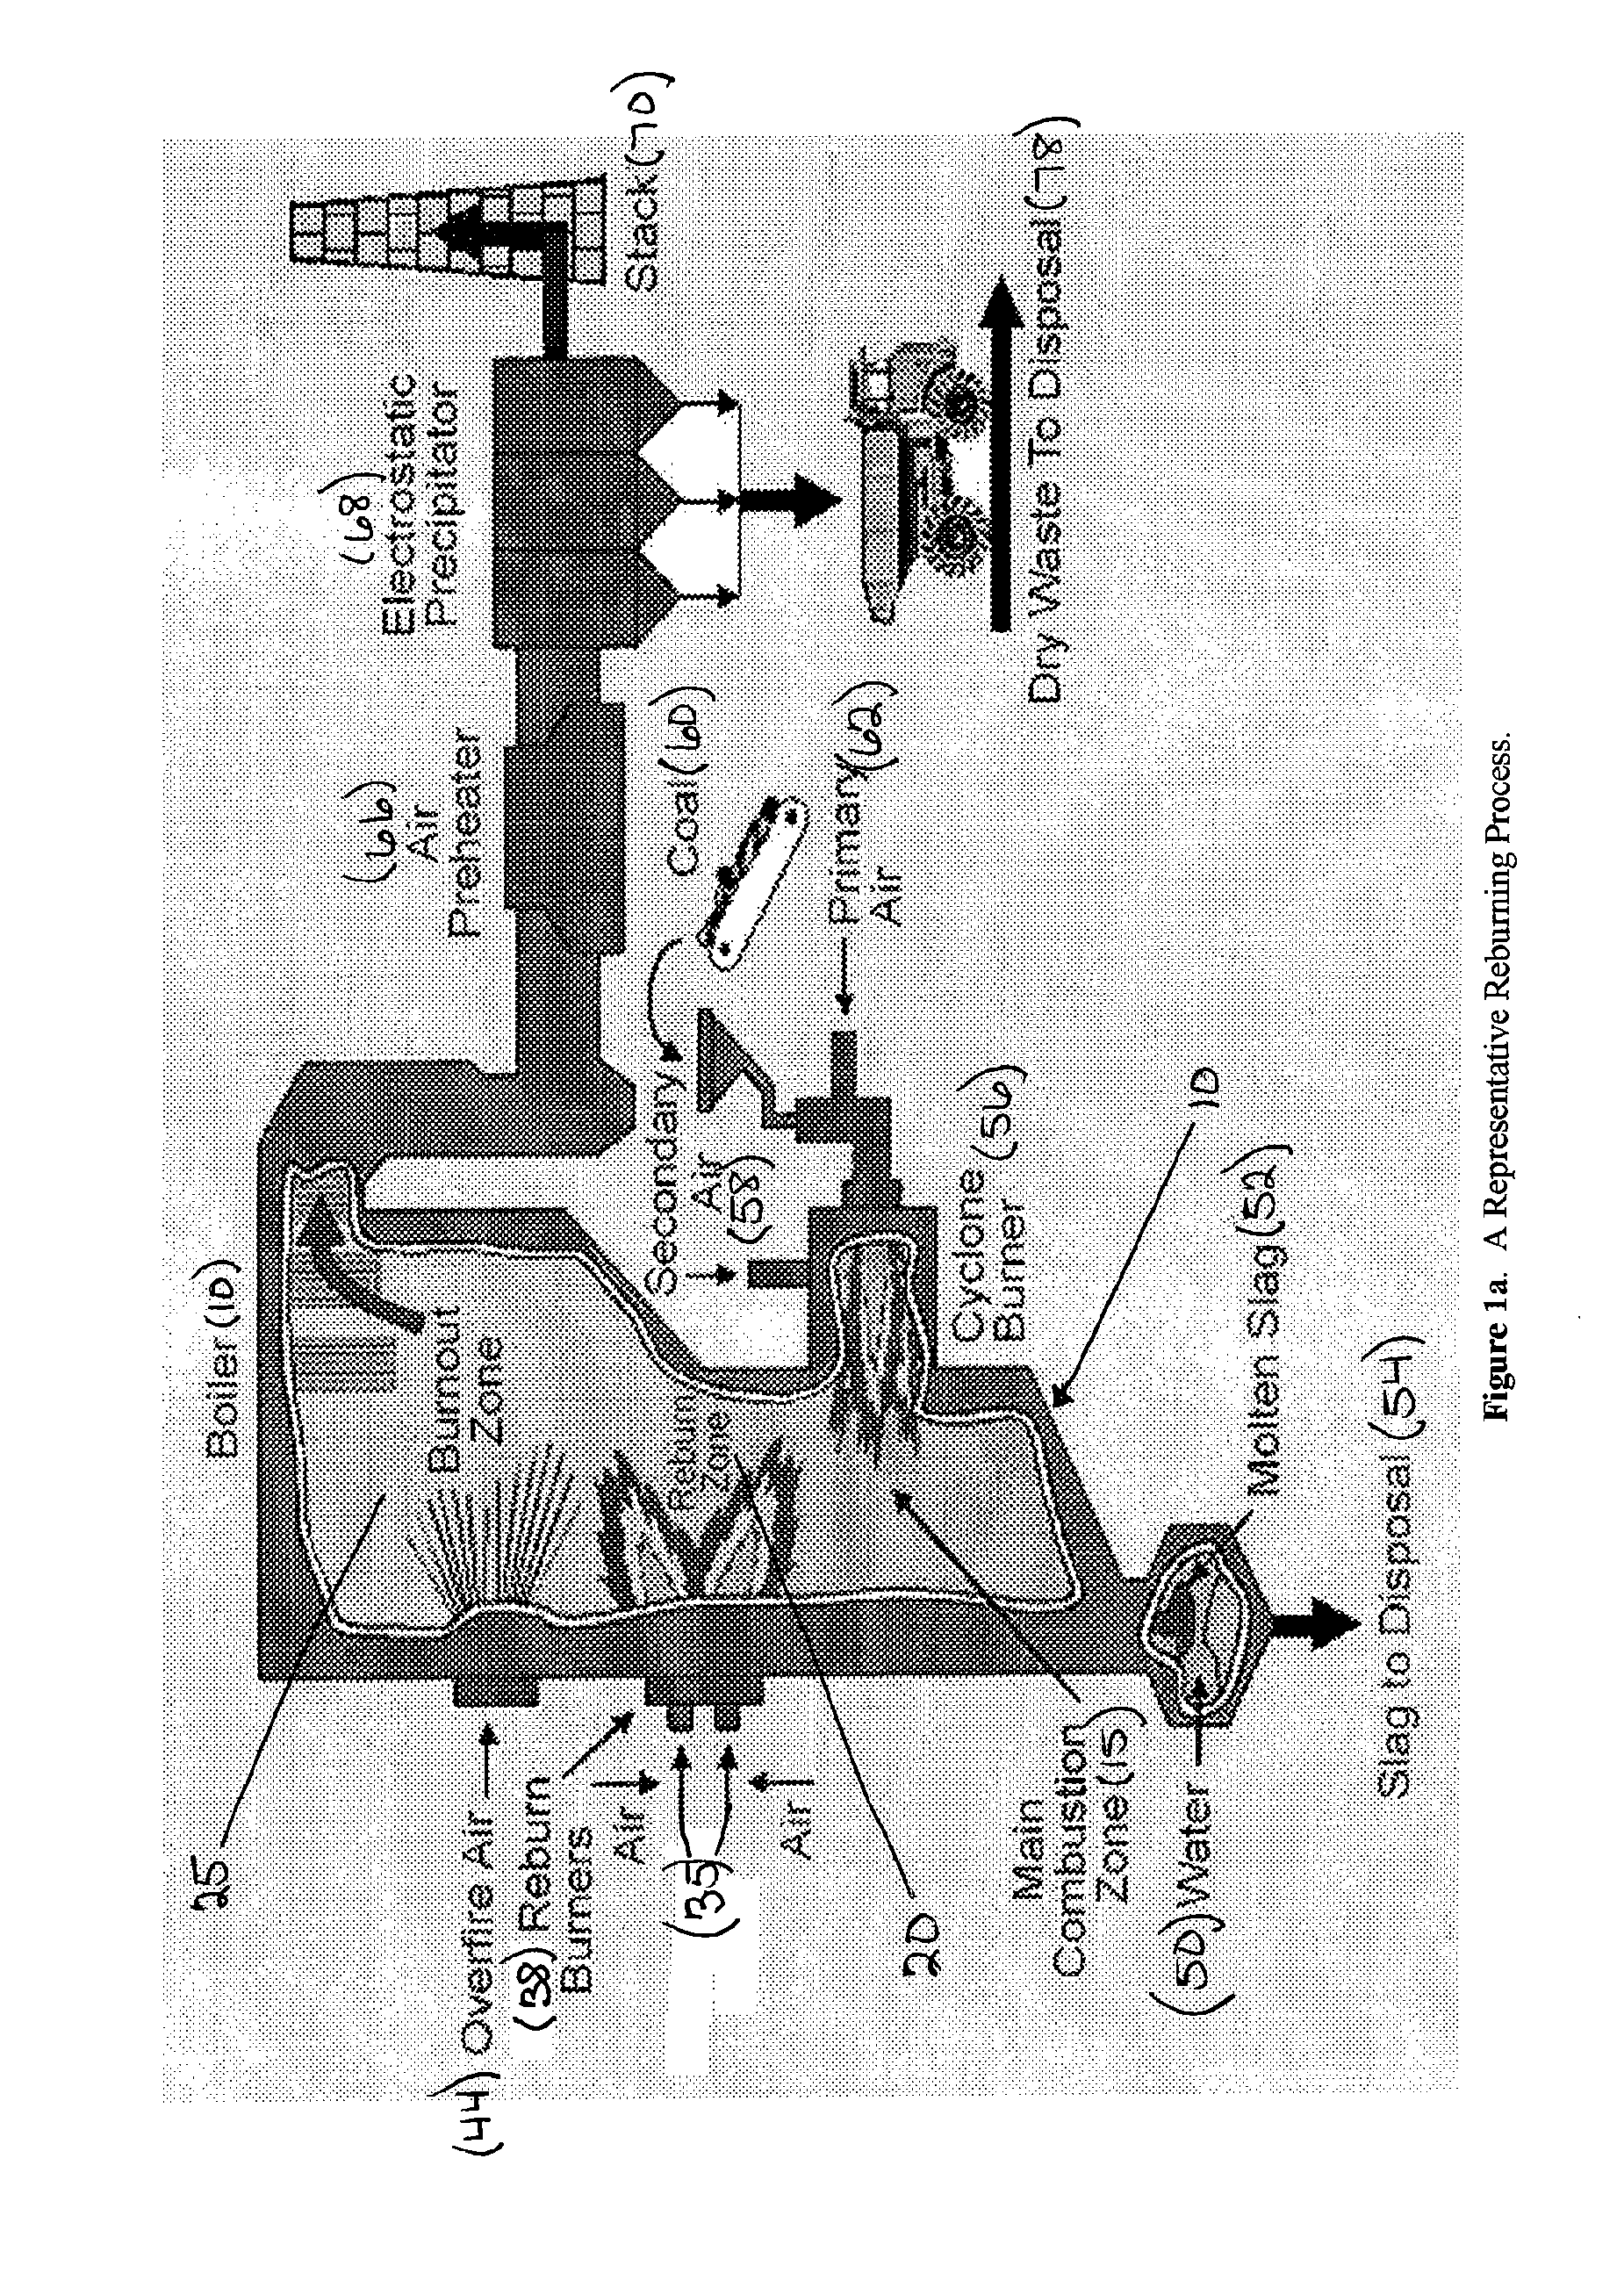 In-Furnace Reduction Of Nitrogen Oxide By Mixed Fuels Involving A Biomass Derivative